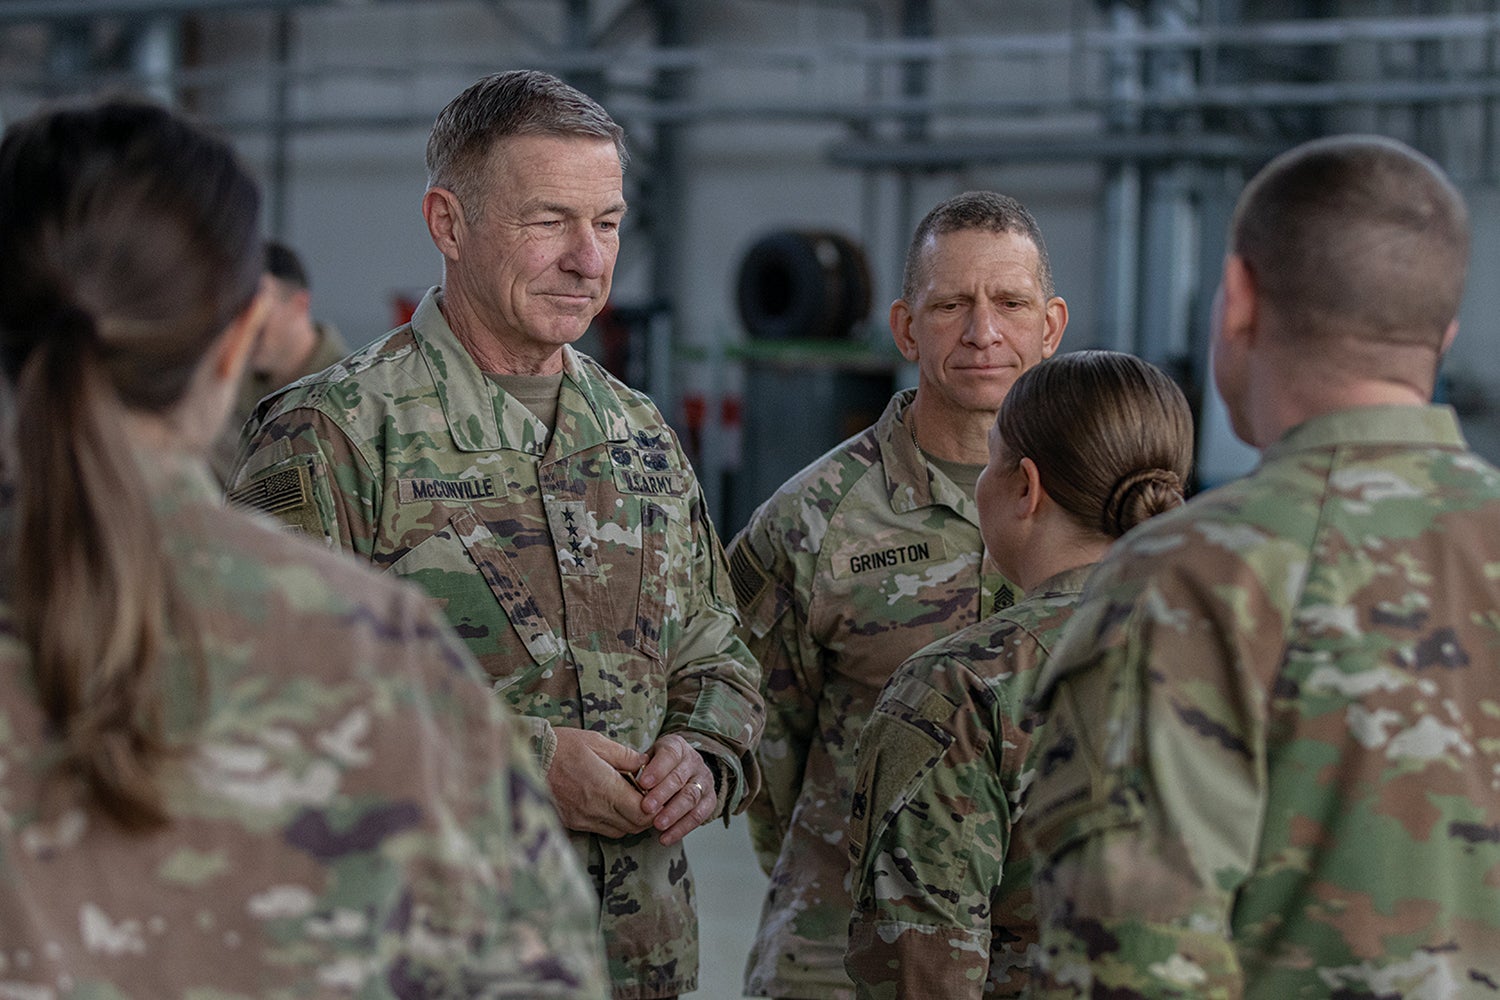 Army Chief of Staff Gen. James McConville, left, and Sgt. Maj. of the Army Michael Grinston, right, recognize a soldier from the 1st Armored Division Combat Aviation Brigade with a challenge coin in Powidz, Poland. (Credit: U.S. Army/Spc. William Thompson)